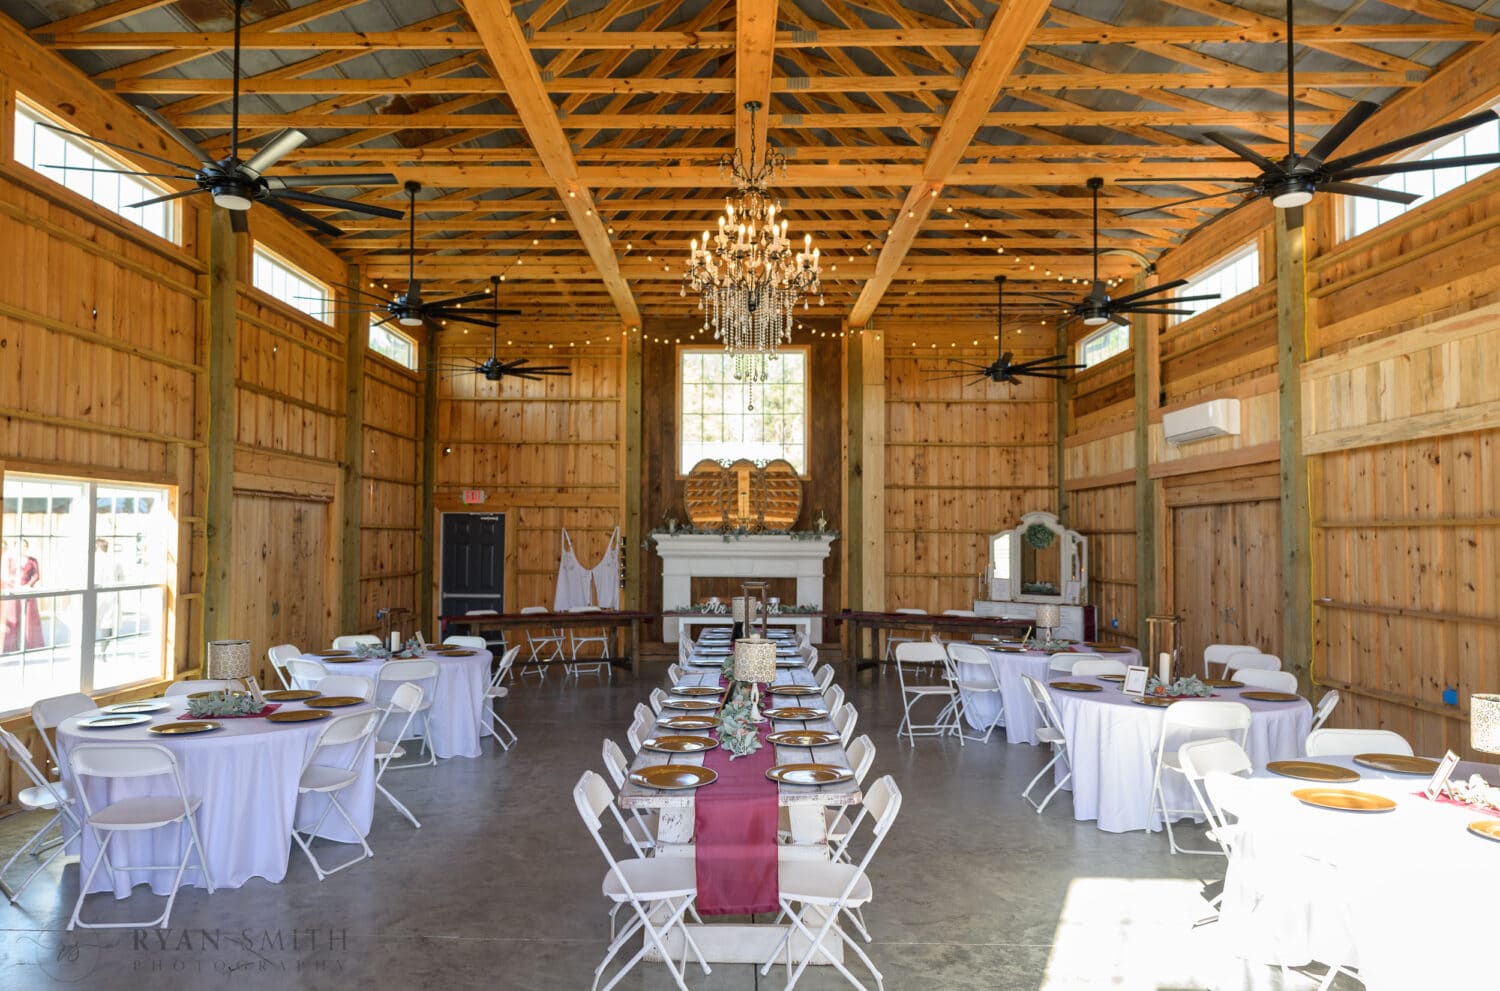 Tables in the barn - The Blessed Barn